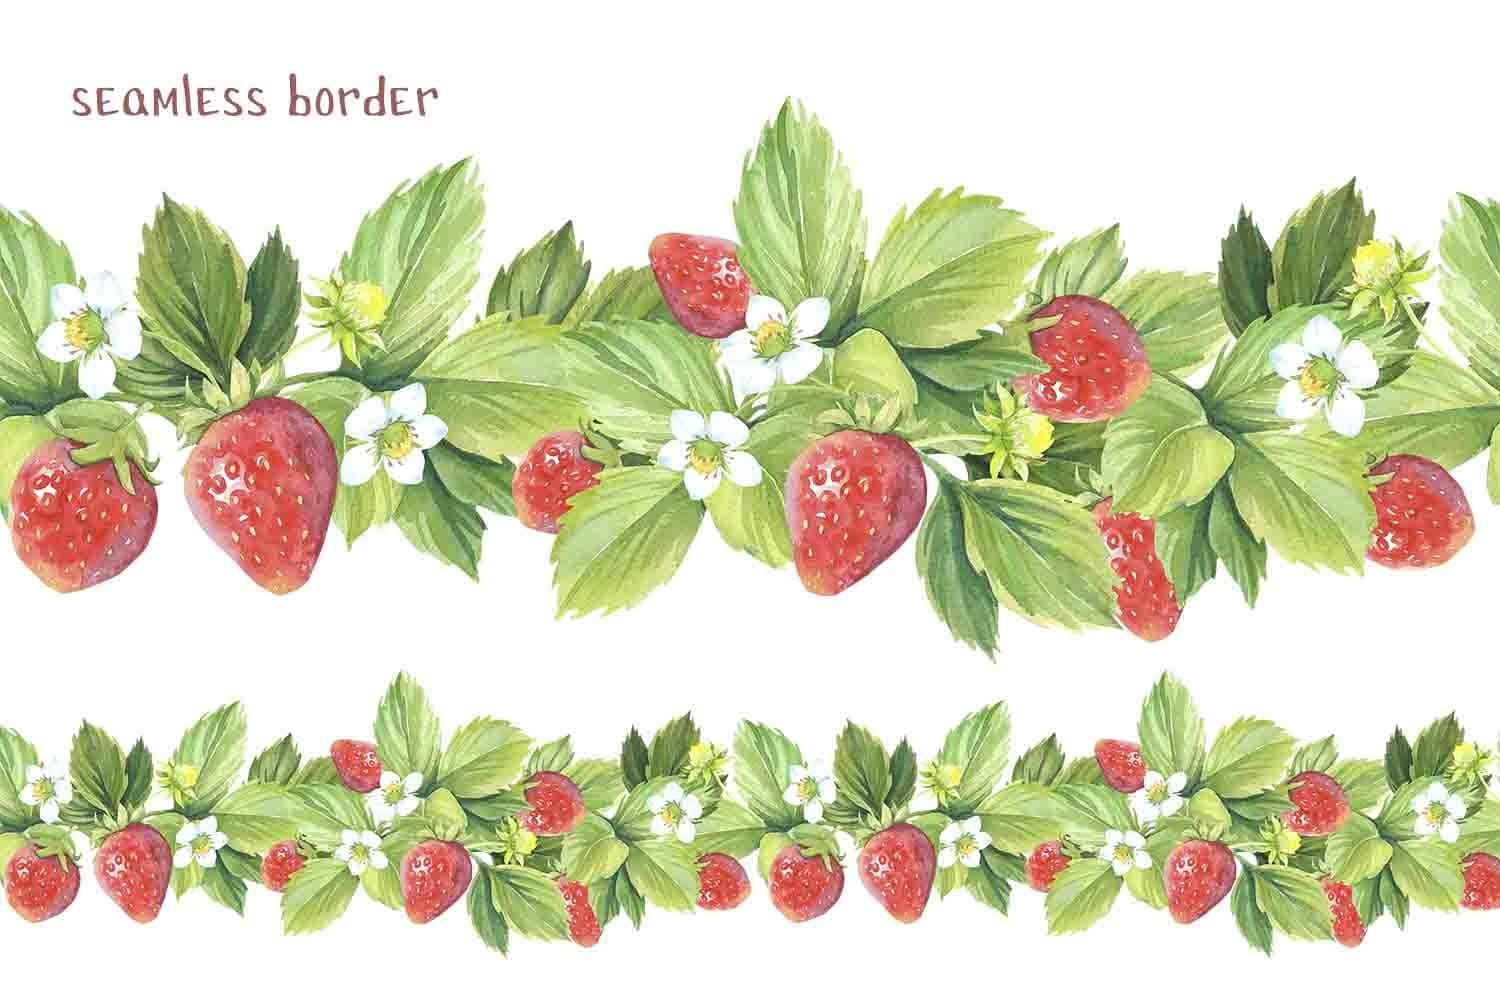 Painted borders consisting of strawberries, leaves and flowers.